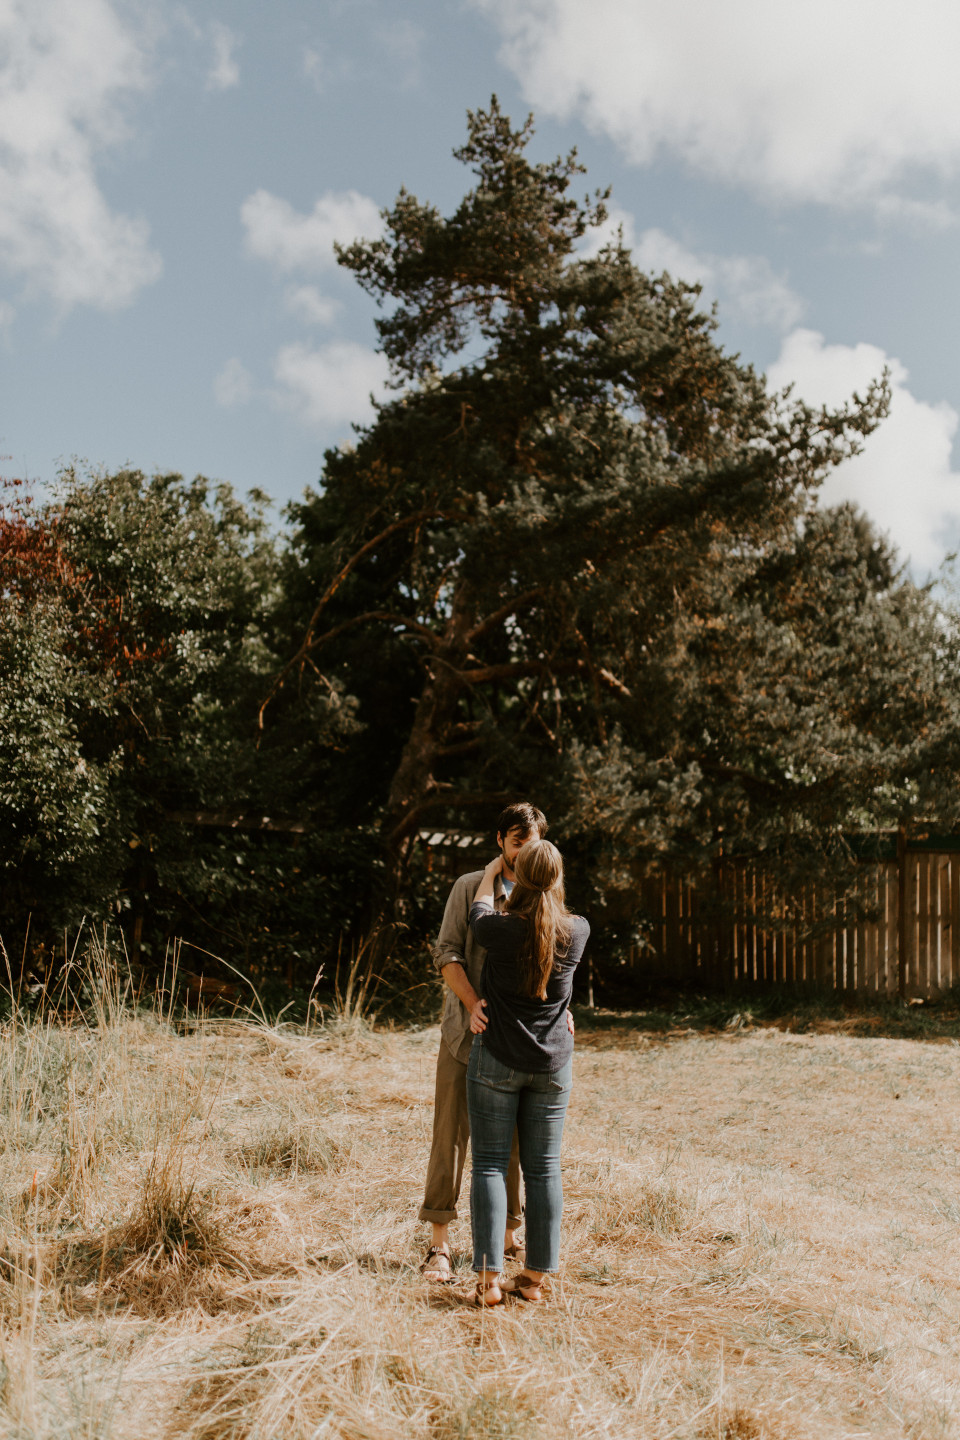 Dan and Hannah admire each other in Corvallis Oregon. Intimate wedding photography in Corvallis Oregon by Sienna Plus Josh.